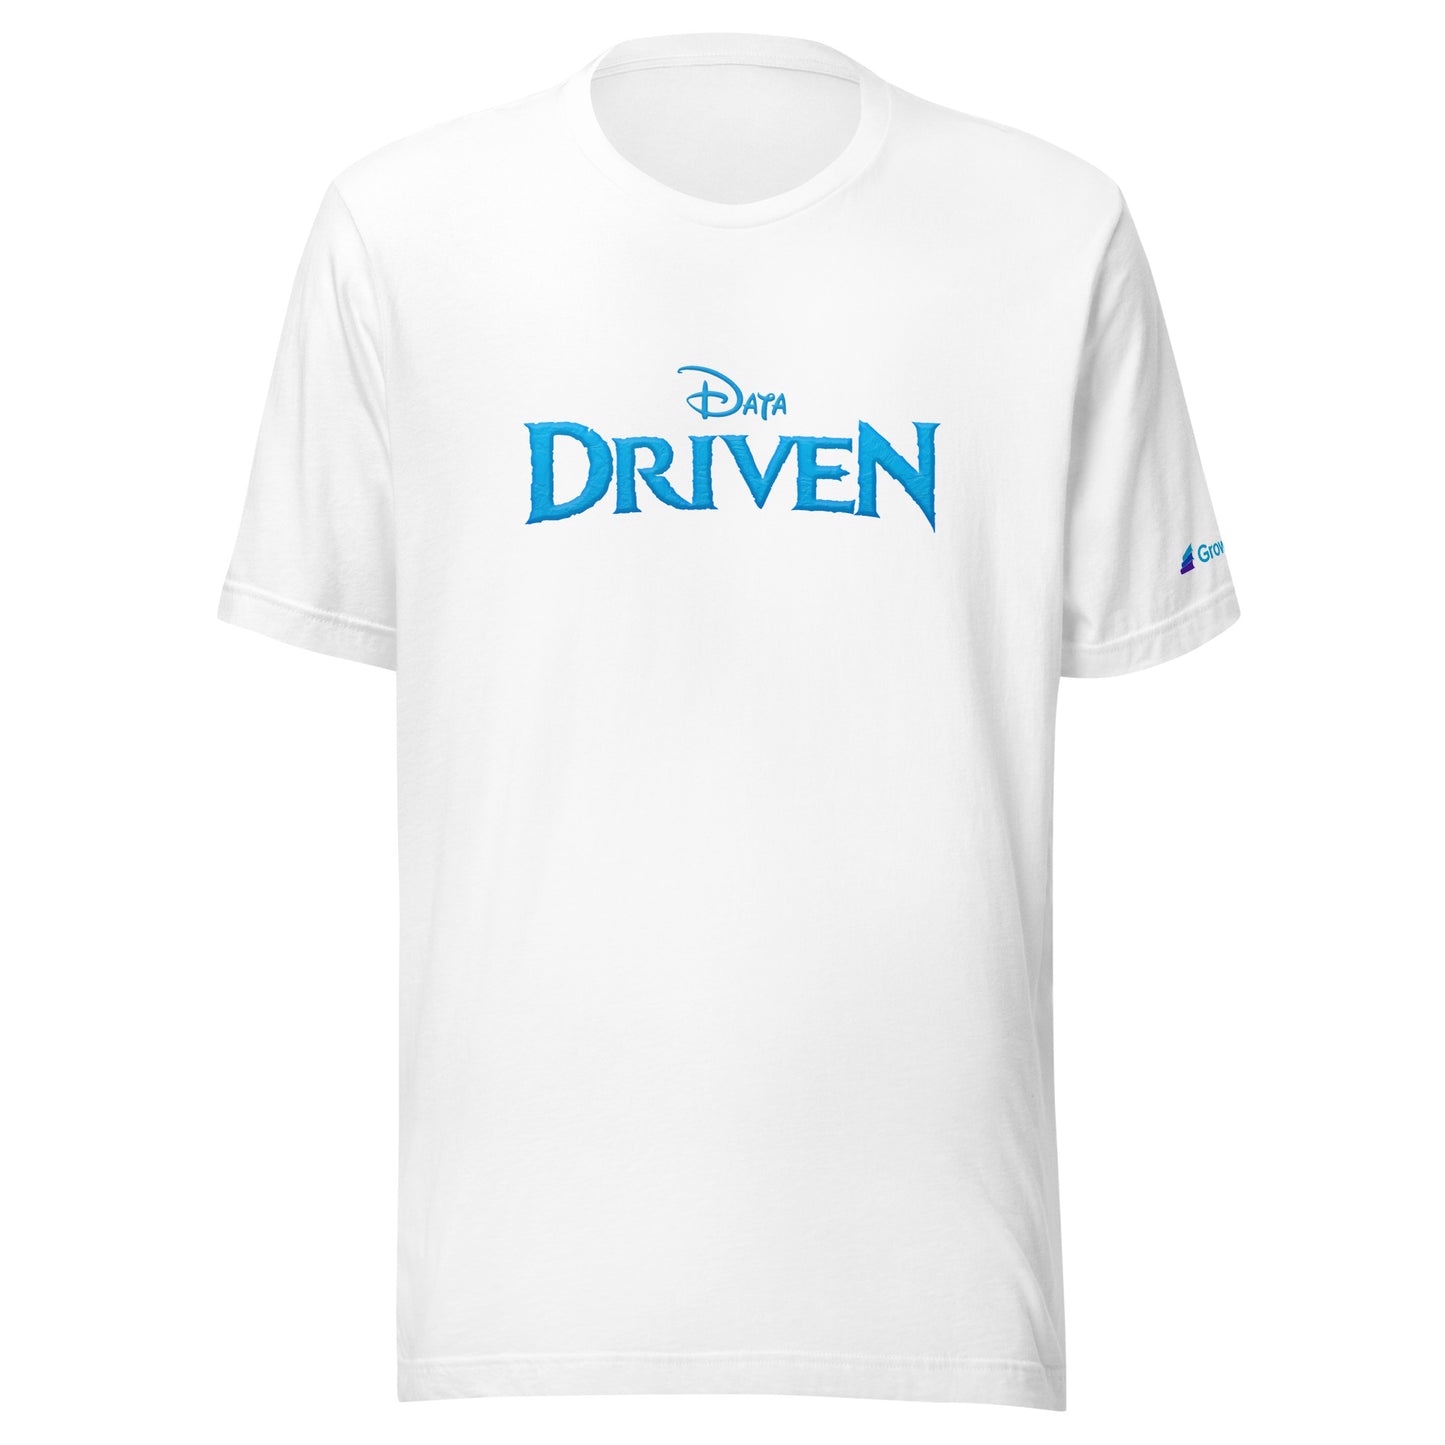 Icy Data Driven T-shirt